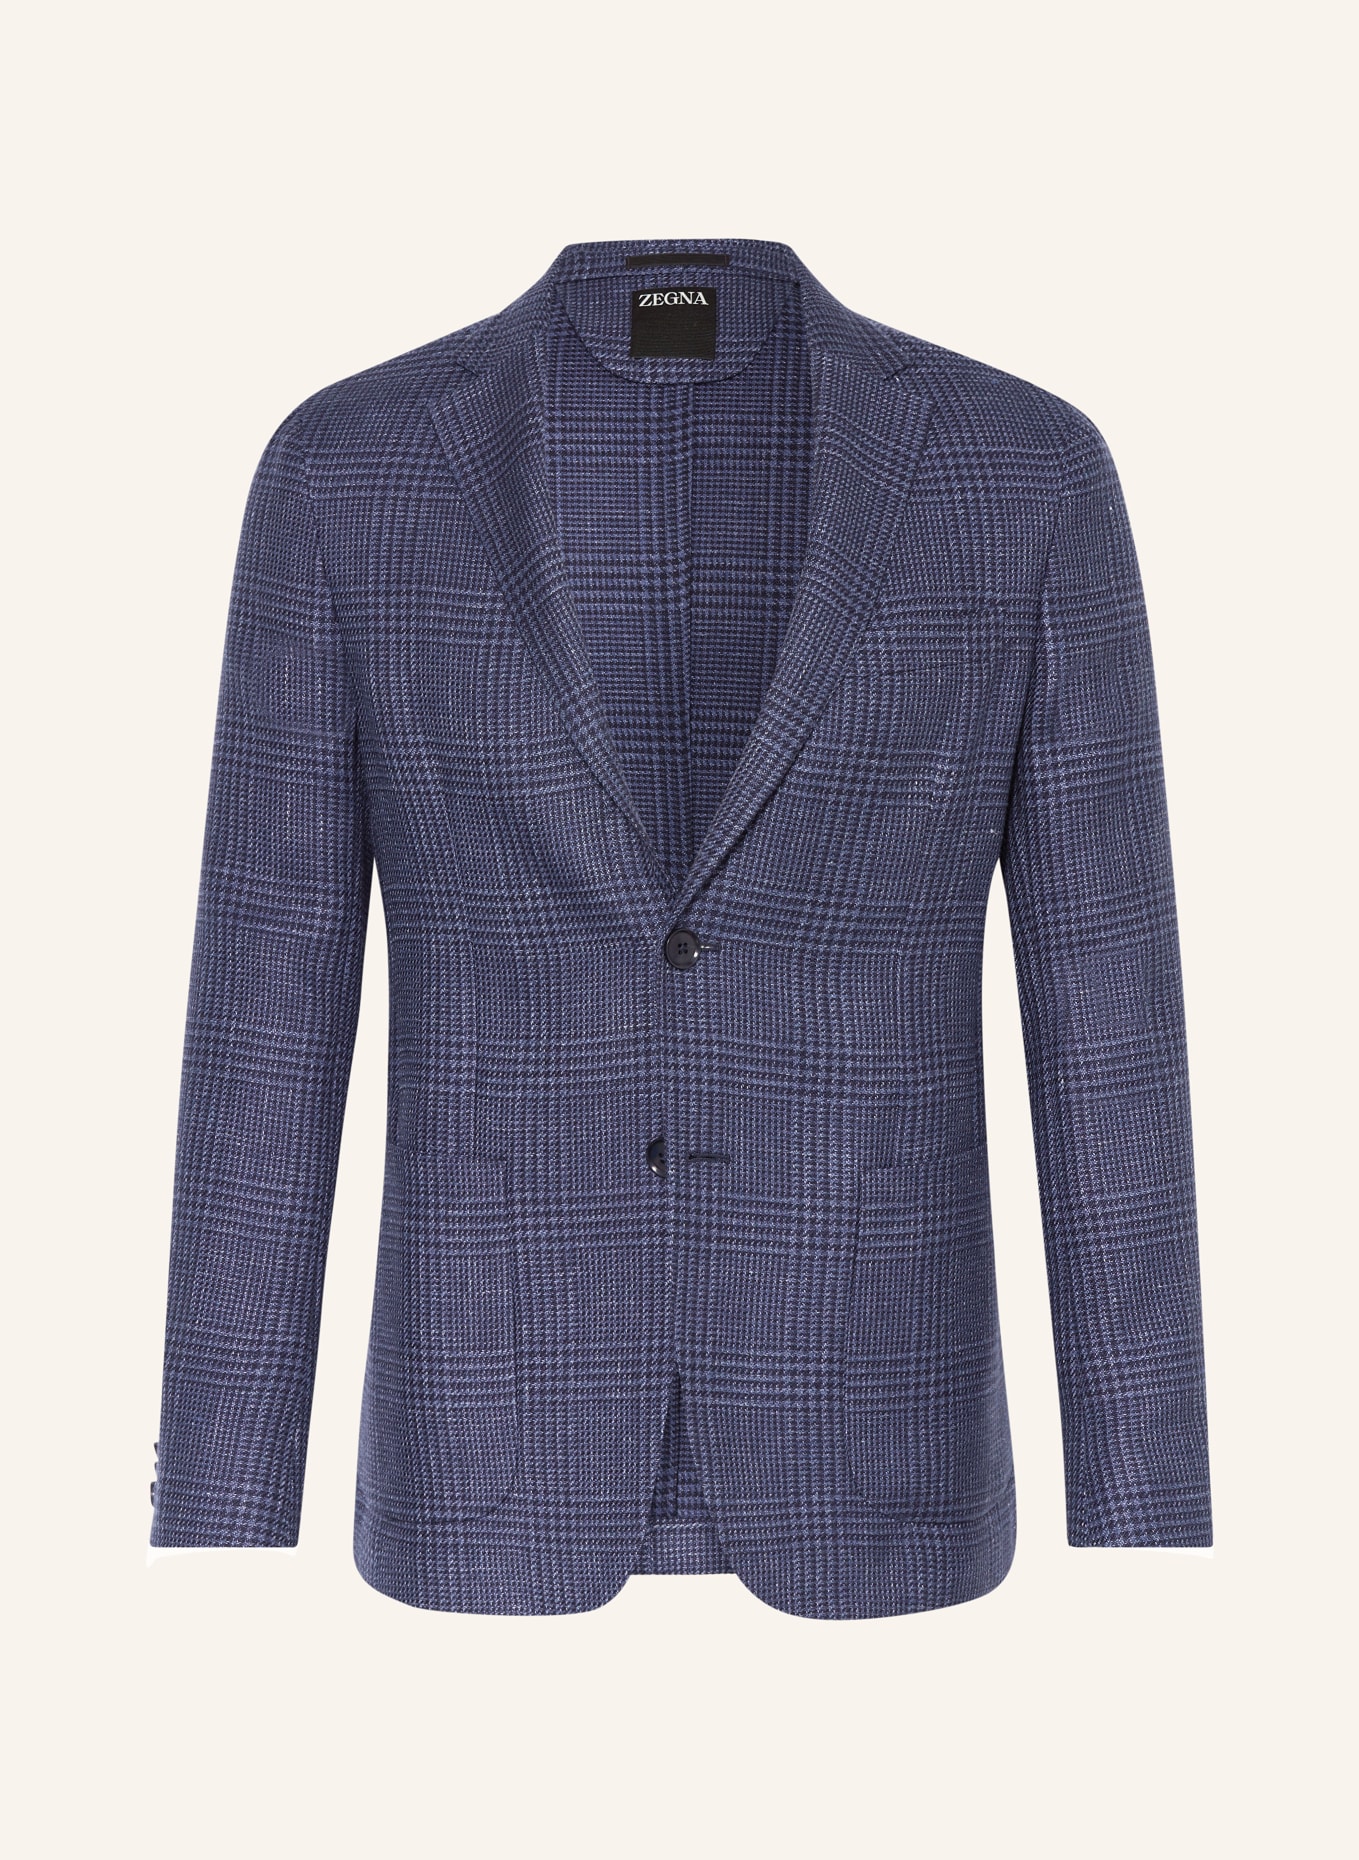 ZEGNA Tailored jacket extra slim fit with linen, Color: BLUE/ DARK BLUE (Image 1)